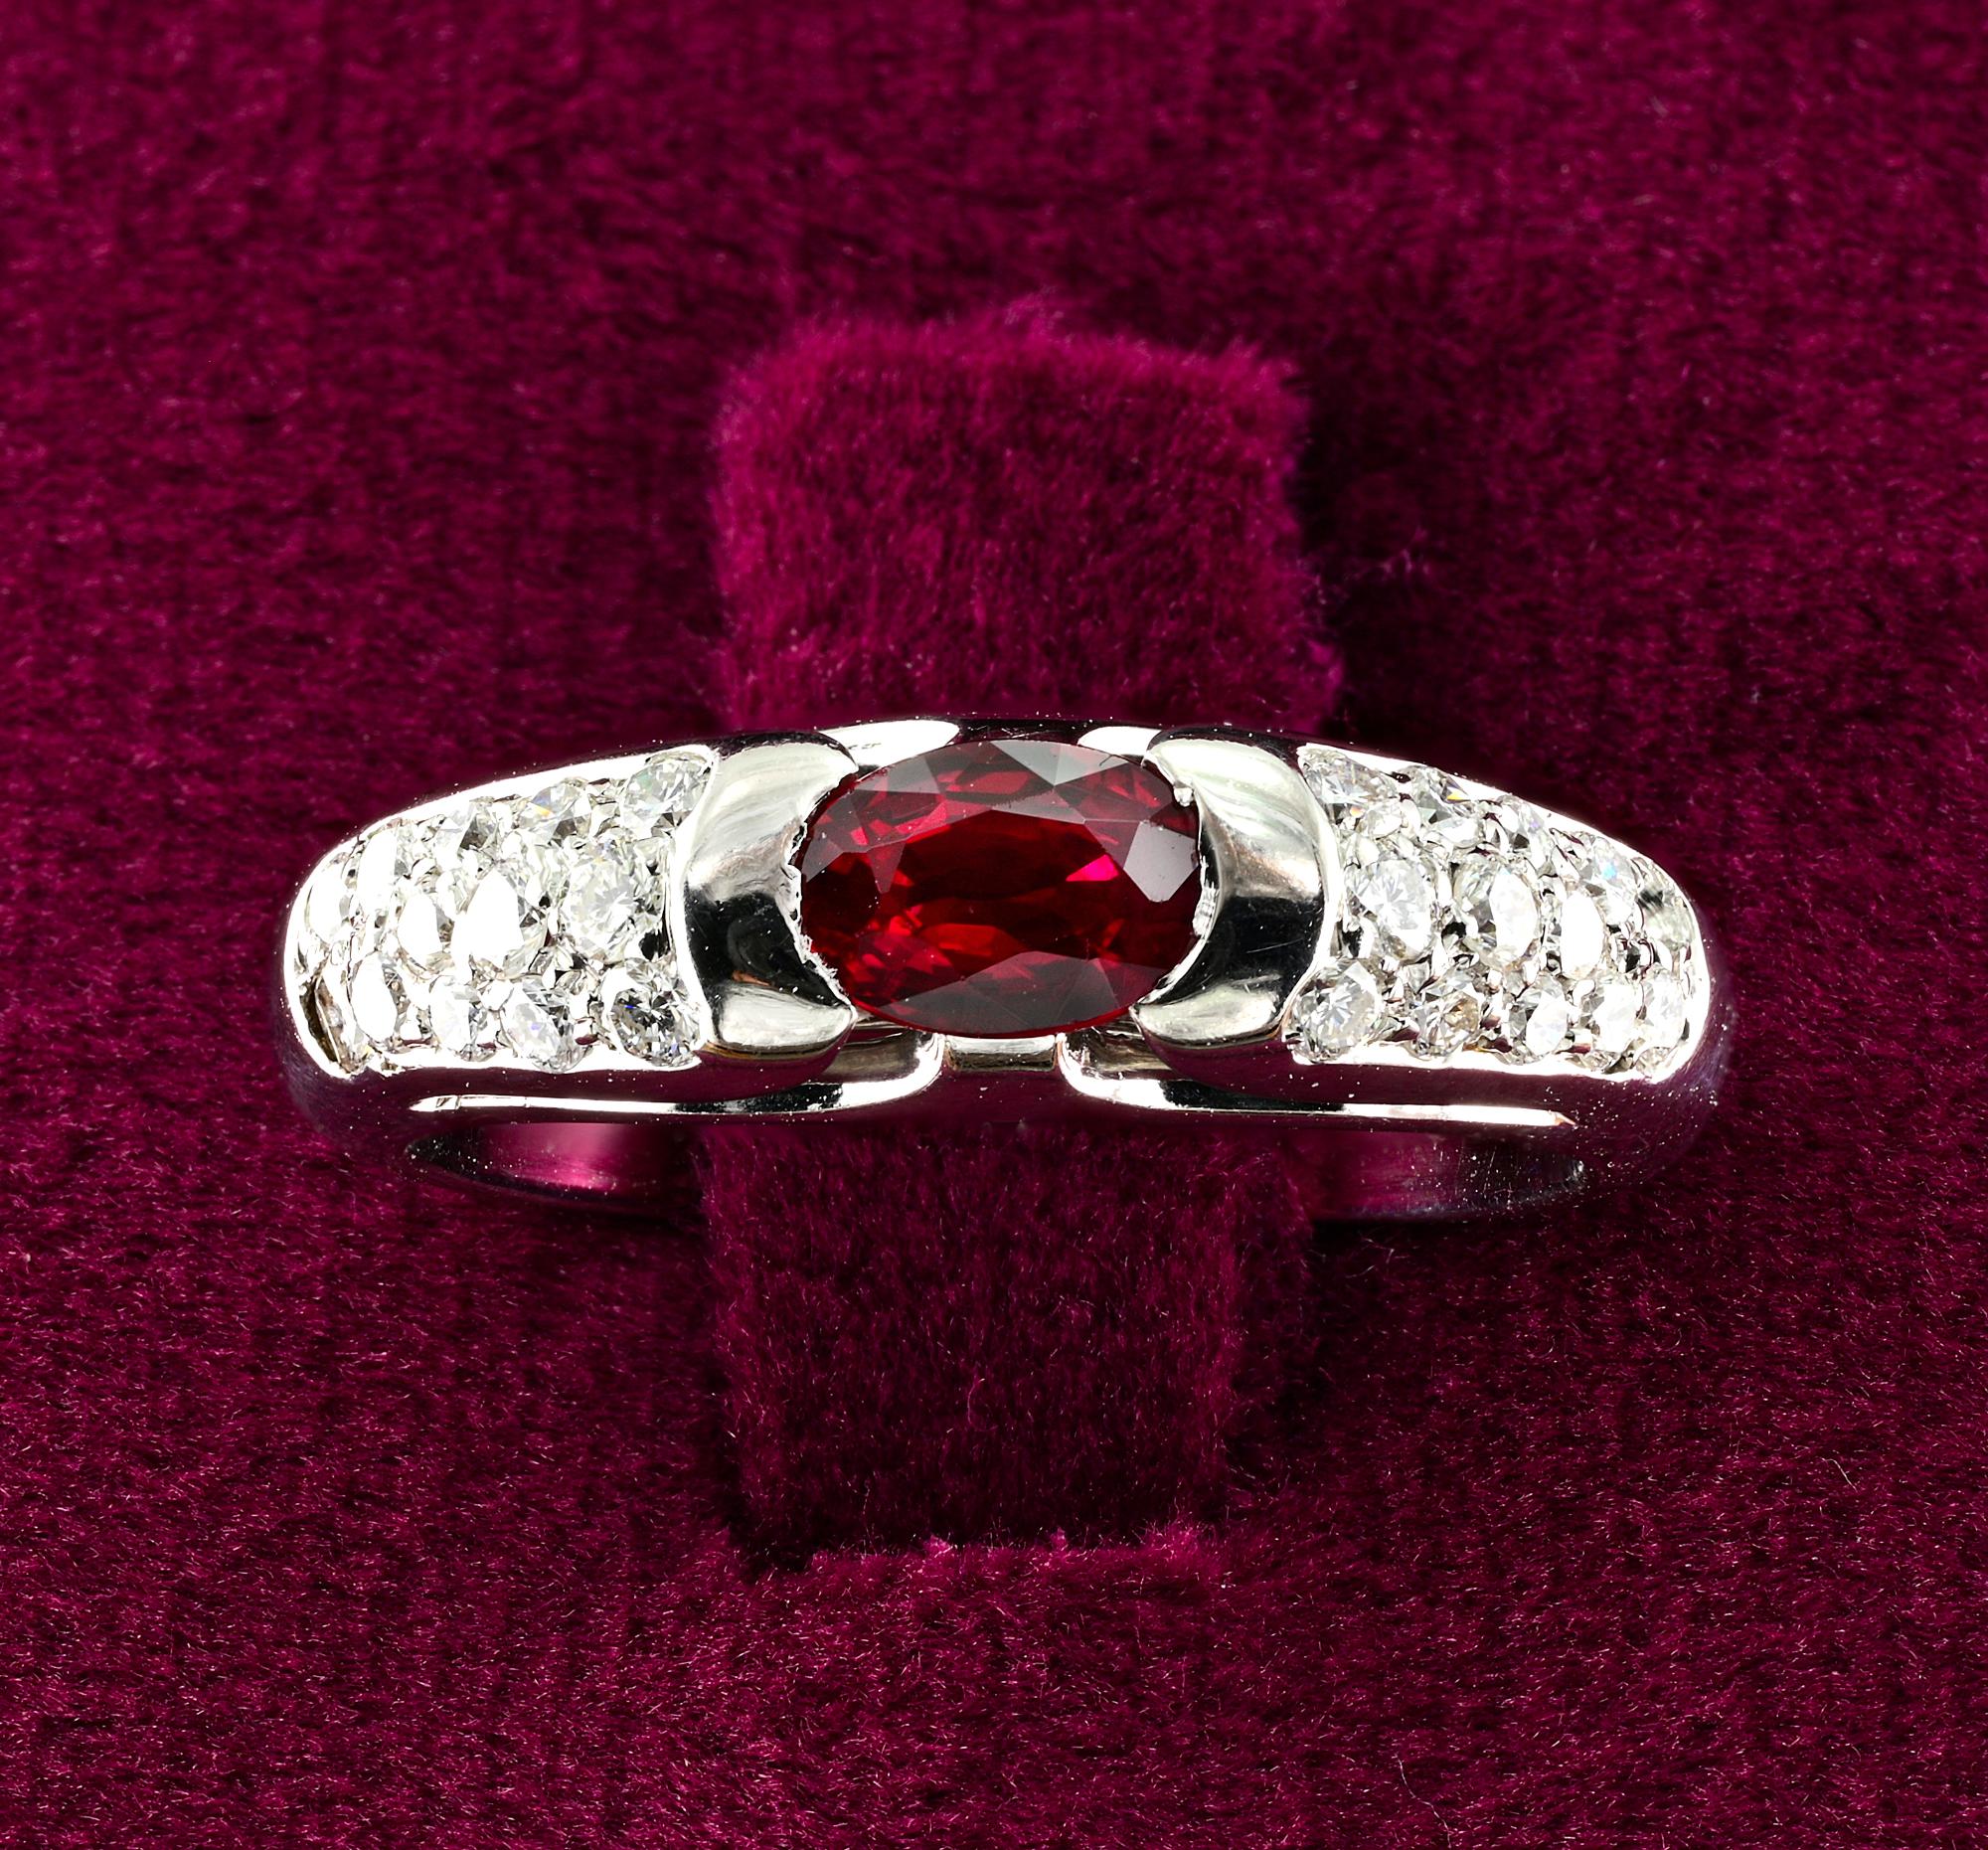 This Bvlgari classy designed band ring is 1980 ca
Hand crafted in a charming style of solid 18 KT white gold
Bearing Bvlgari hallmarks, assay Italy
Set with a stunning Red Pigeon Blood natural Ruby, approx. .55 Ct (5.80 mm. x 4.11 mm.) 